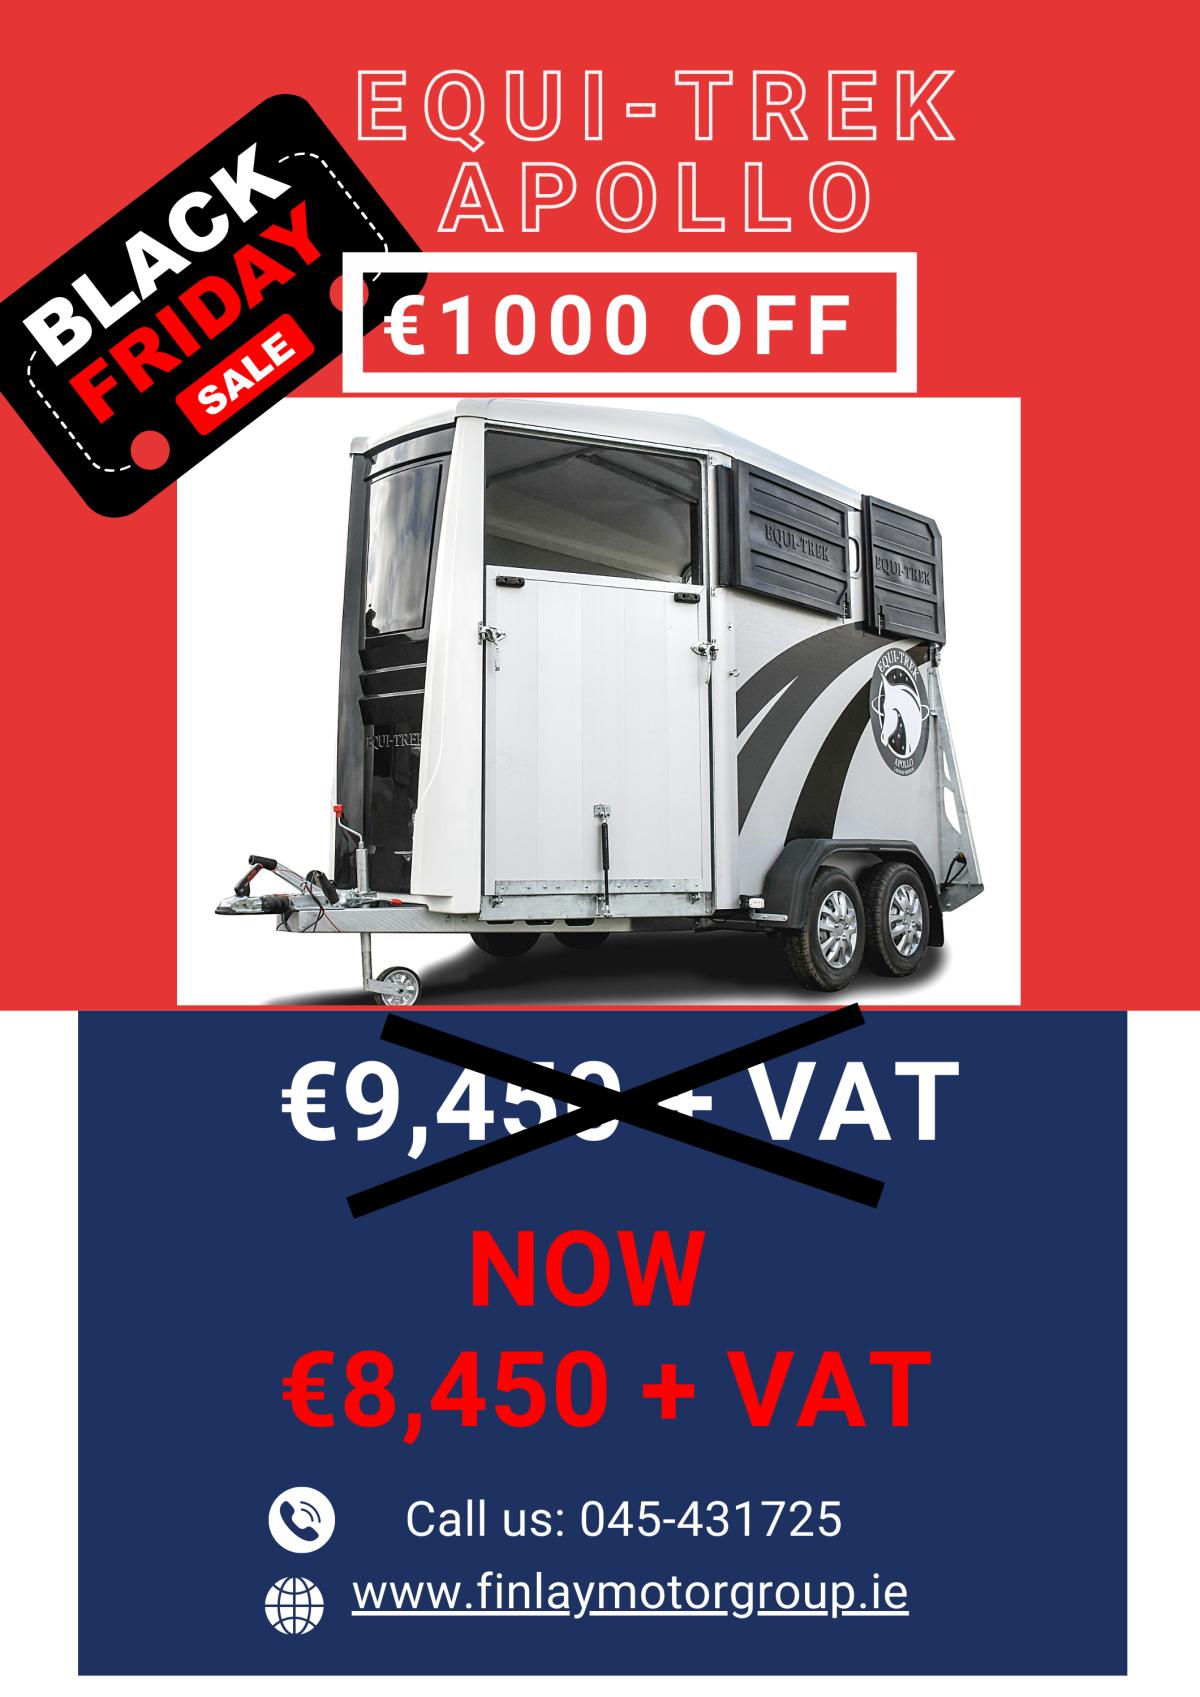 Equi-Trek Apollo €1000 OFF for the first 2 units sold!